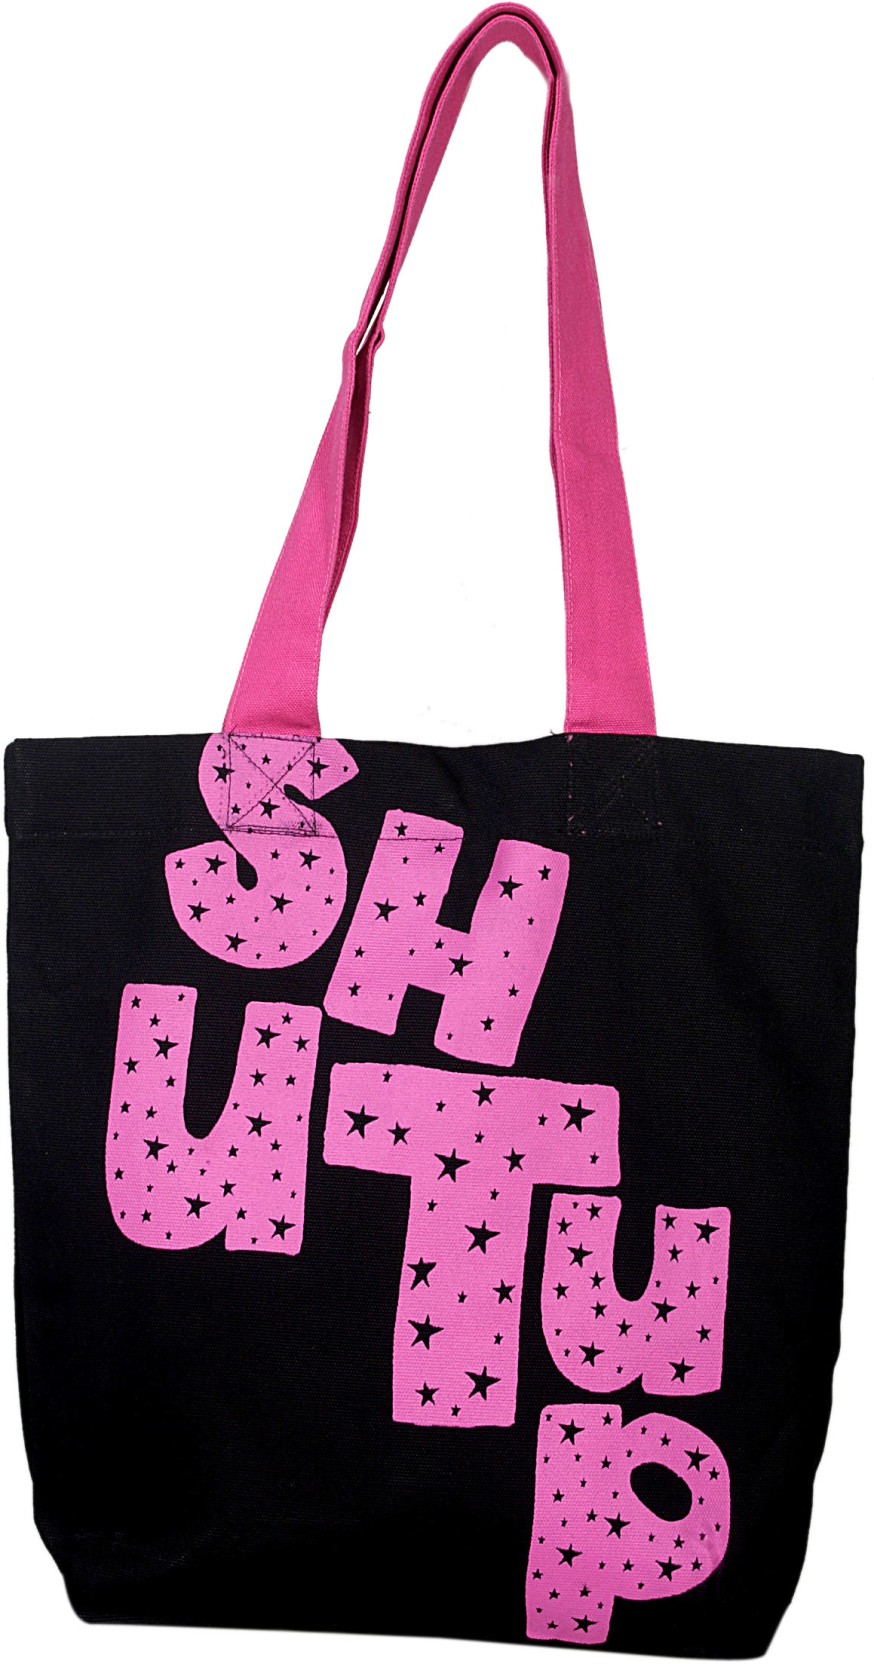 Buy Kanvas Katha Tote Black Online @ Best Price in India | mediakits.theygsgroup.com